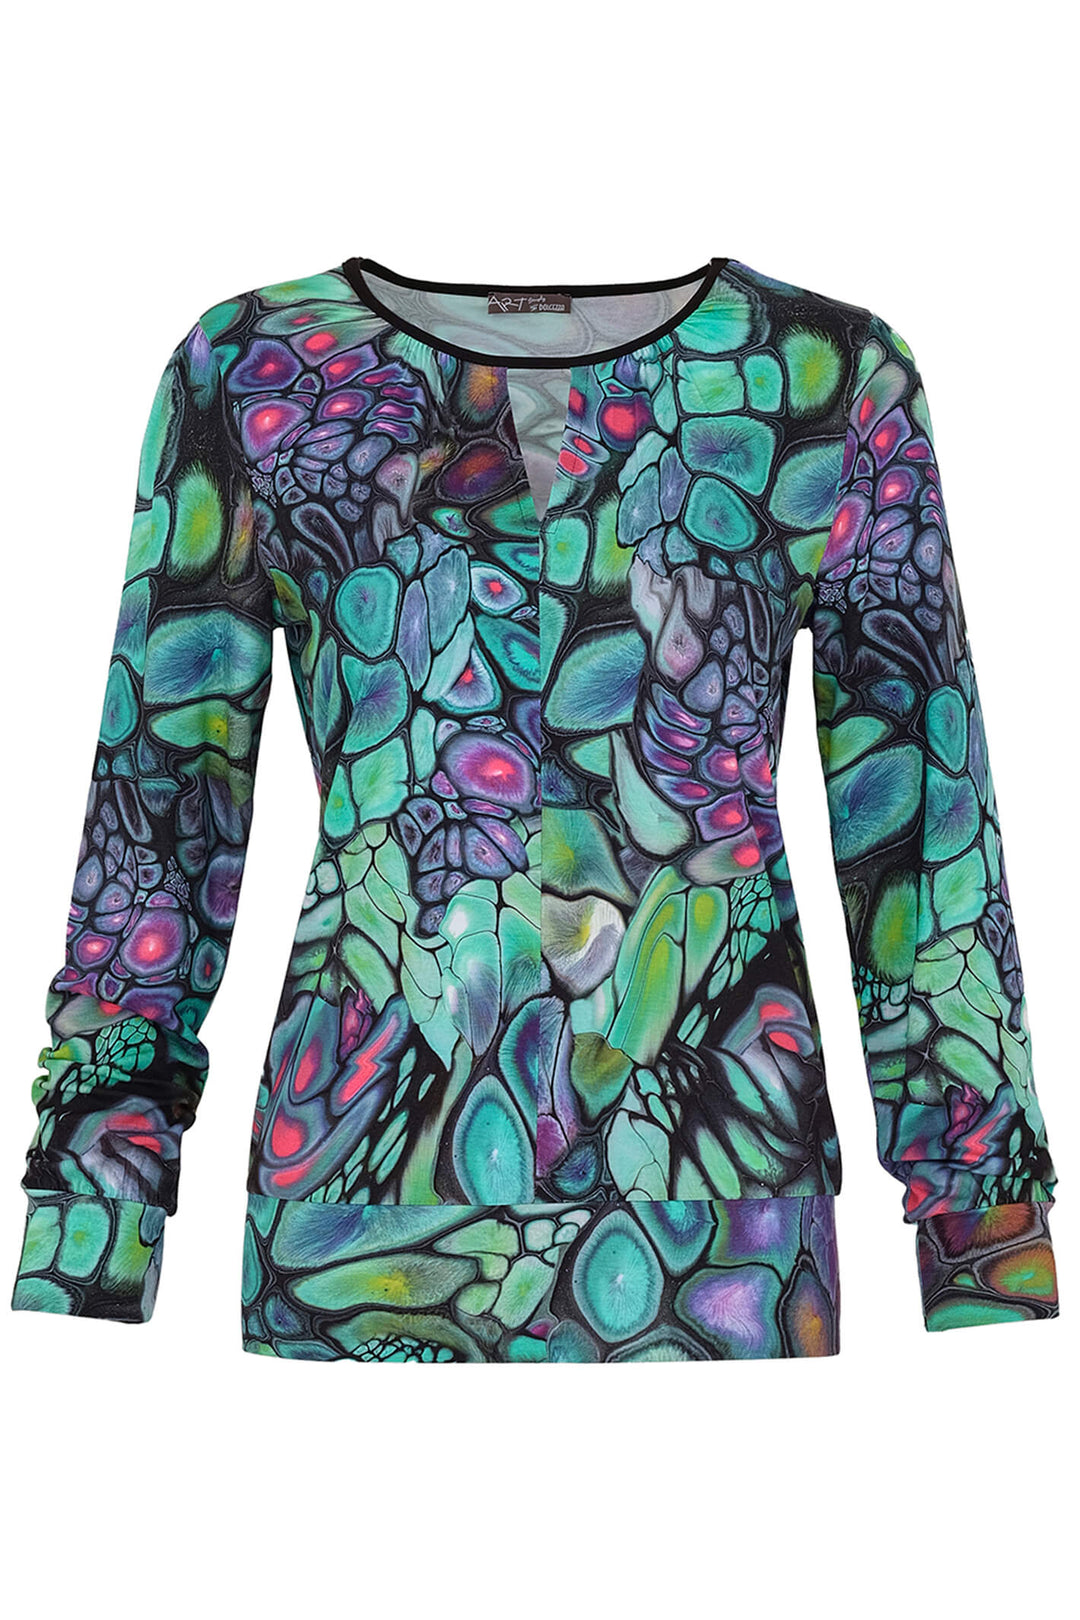 Dolcezza 73662 Green Maria Brookes Print Long Sleeve Top - Experience Boutique